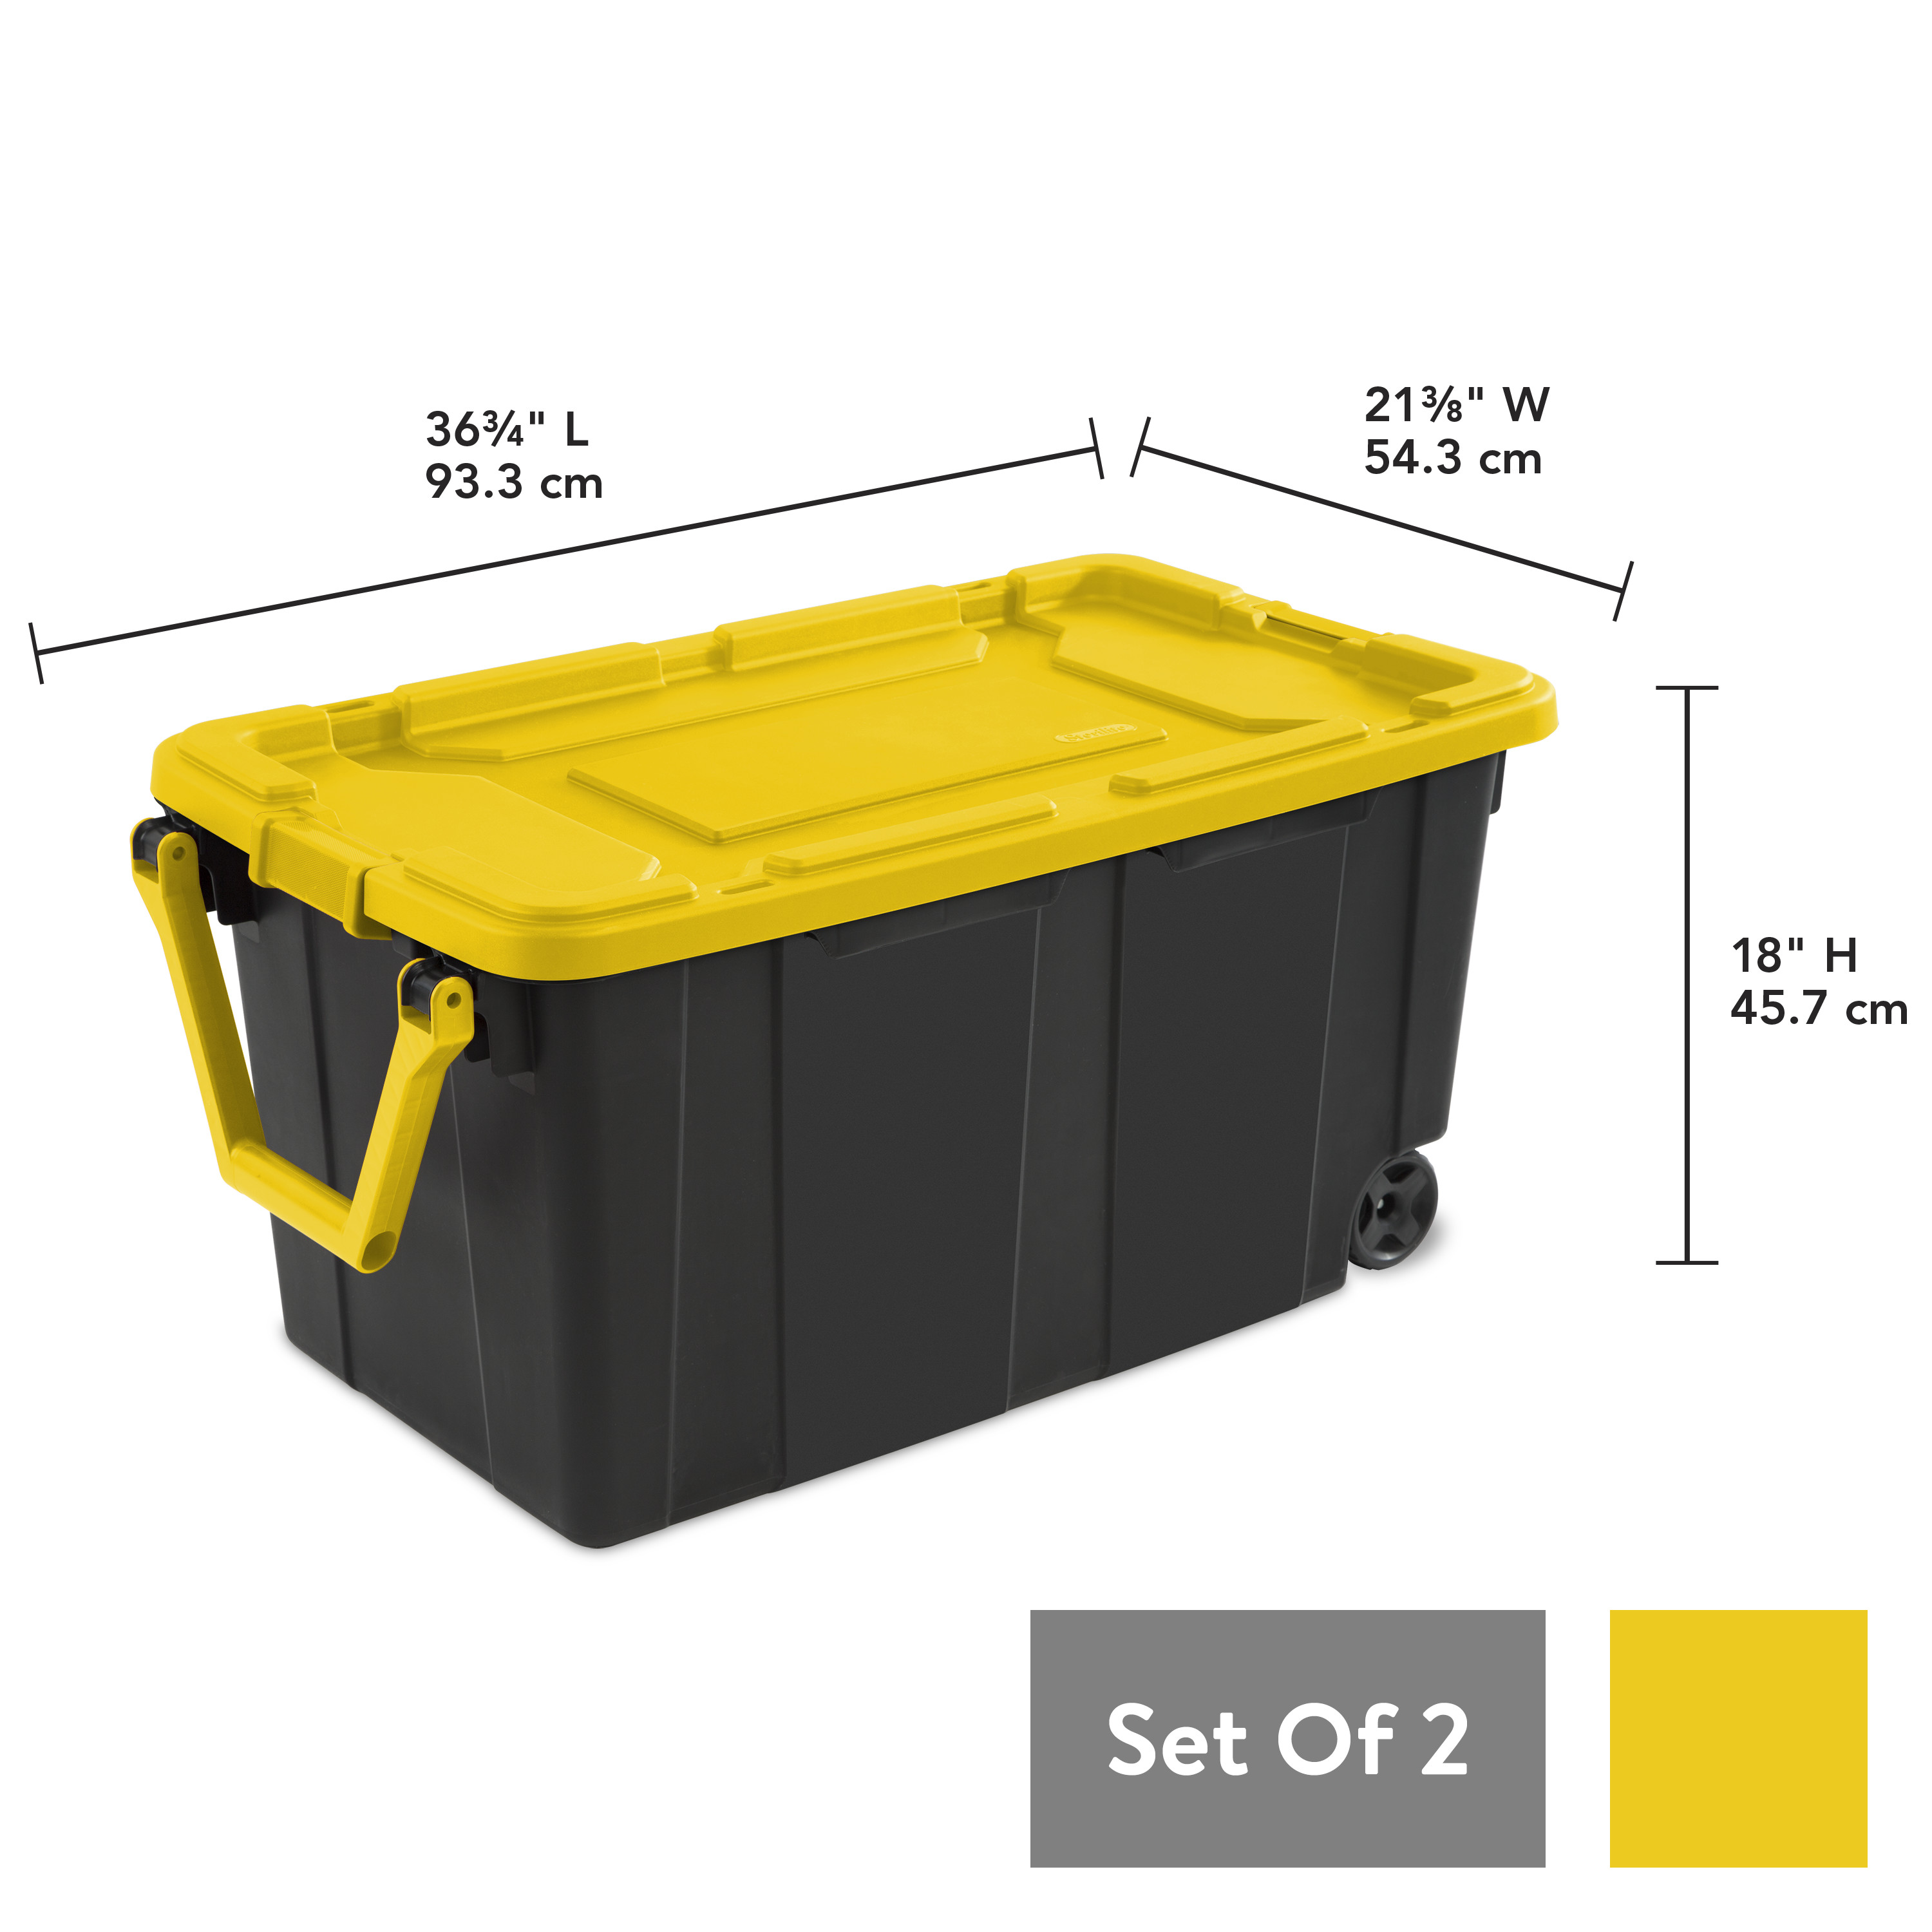 Sterilite Plastic 40 Gallon Wheeled Industrial Storage Tote Yellow Lily, Set of 2 - image 5 of 13